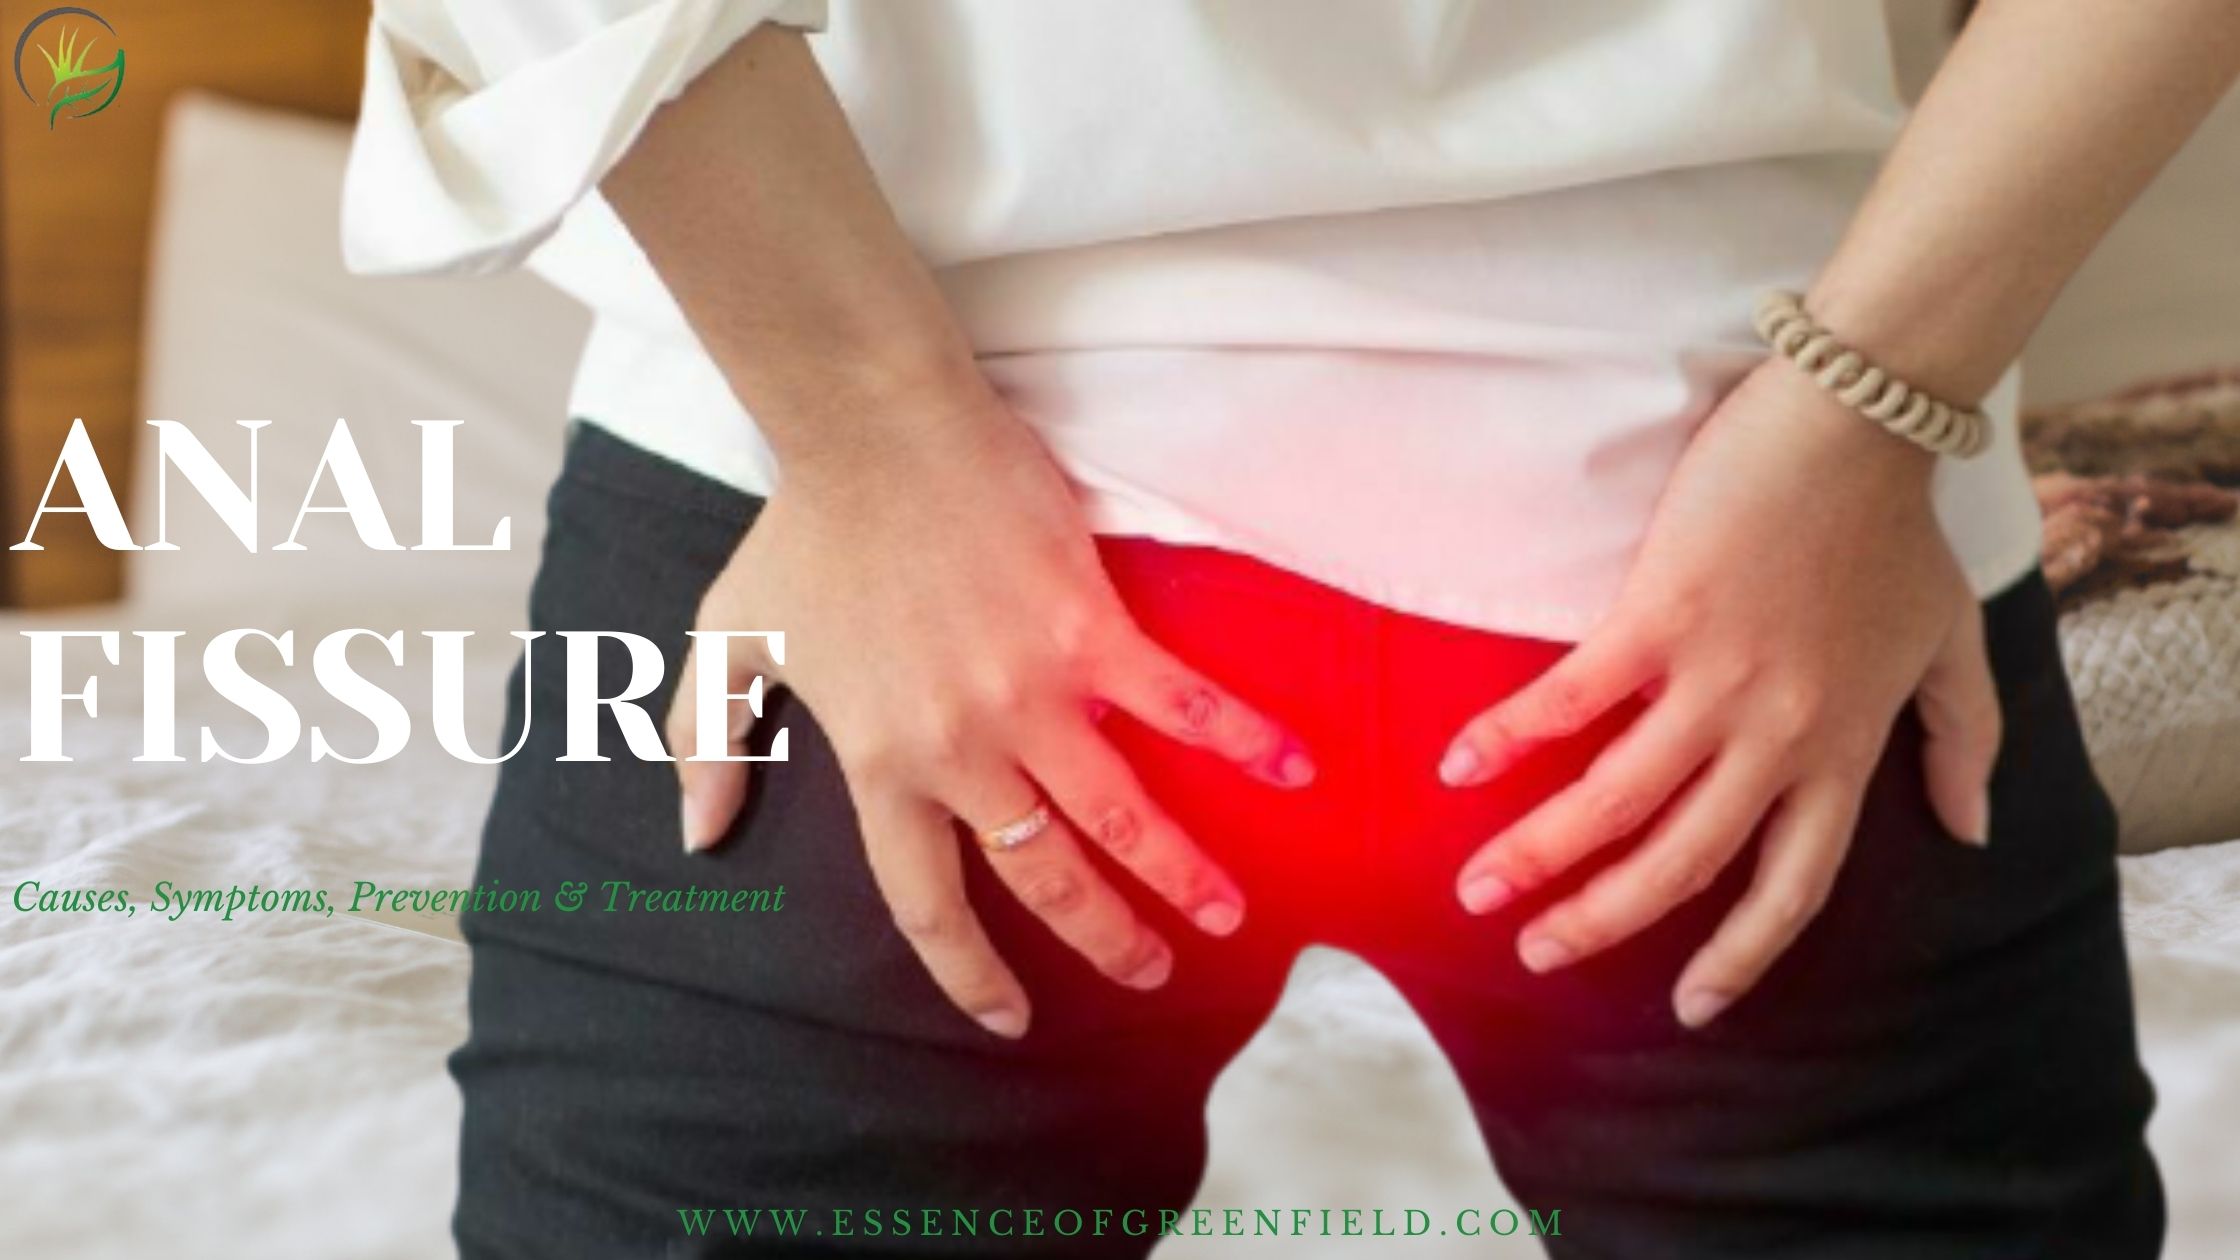 Anal Fissure - Causes, Symptoms, Prevention & Treatment - Essence of Greenfield